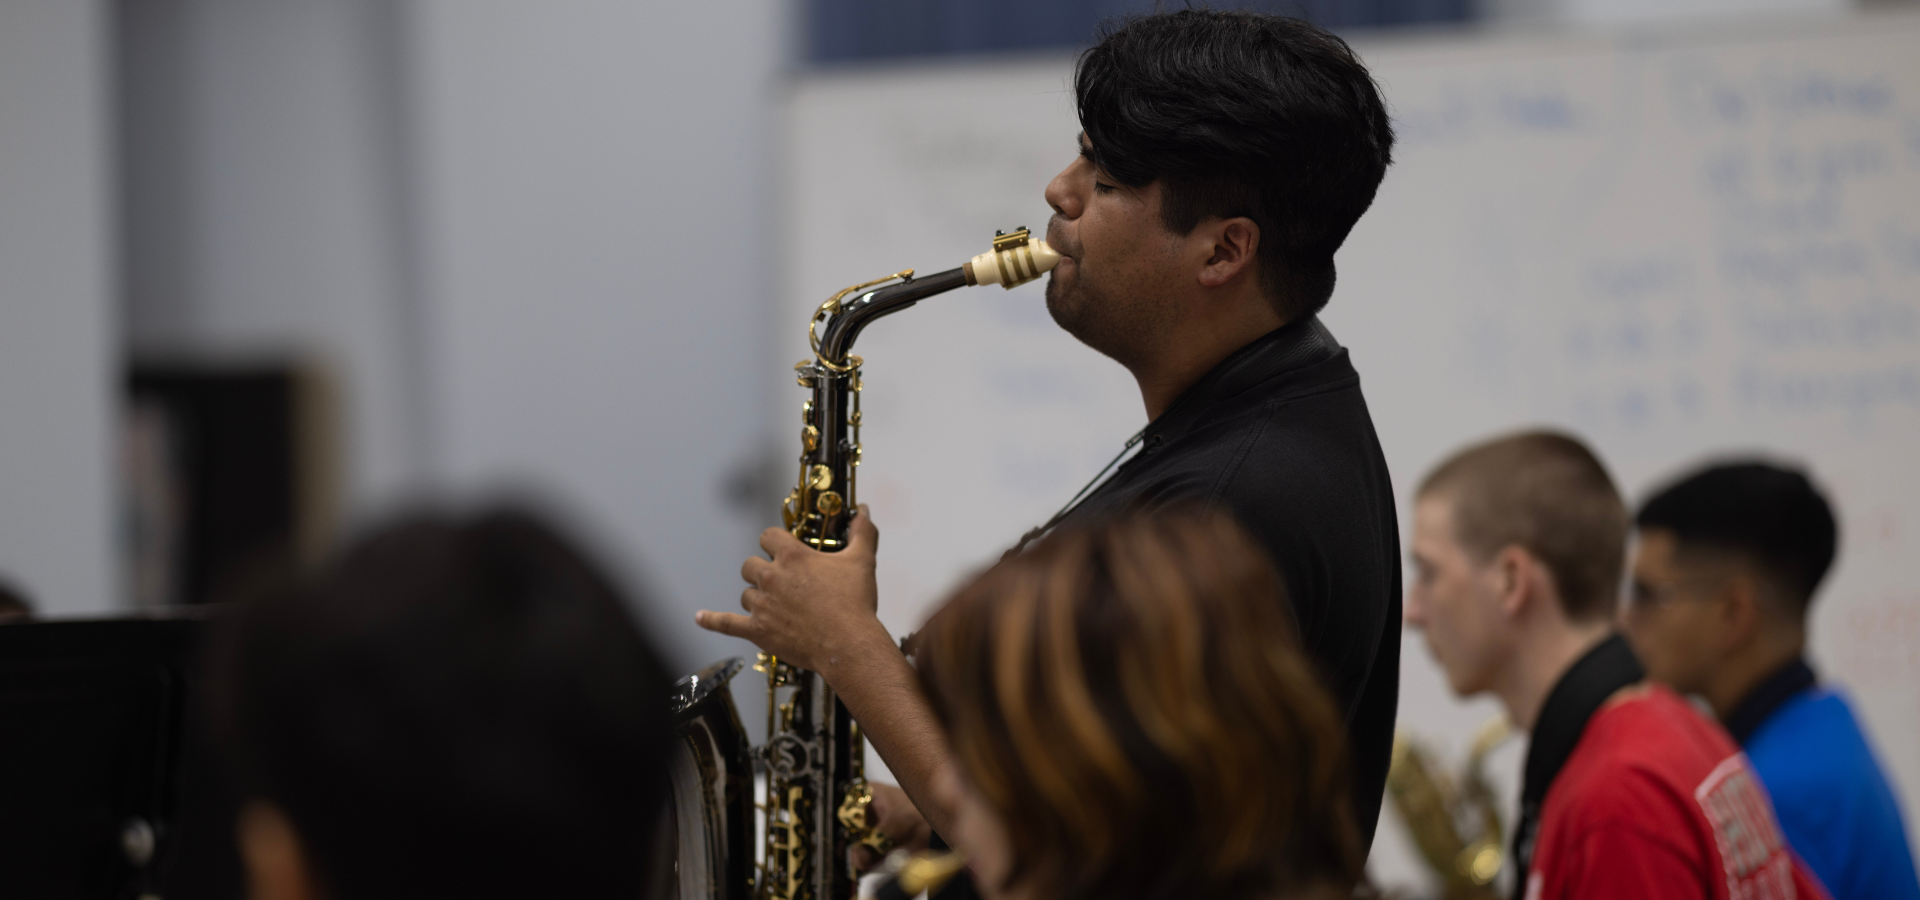 Saxophone player playing a solo with the Moores School of Music jazz band